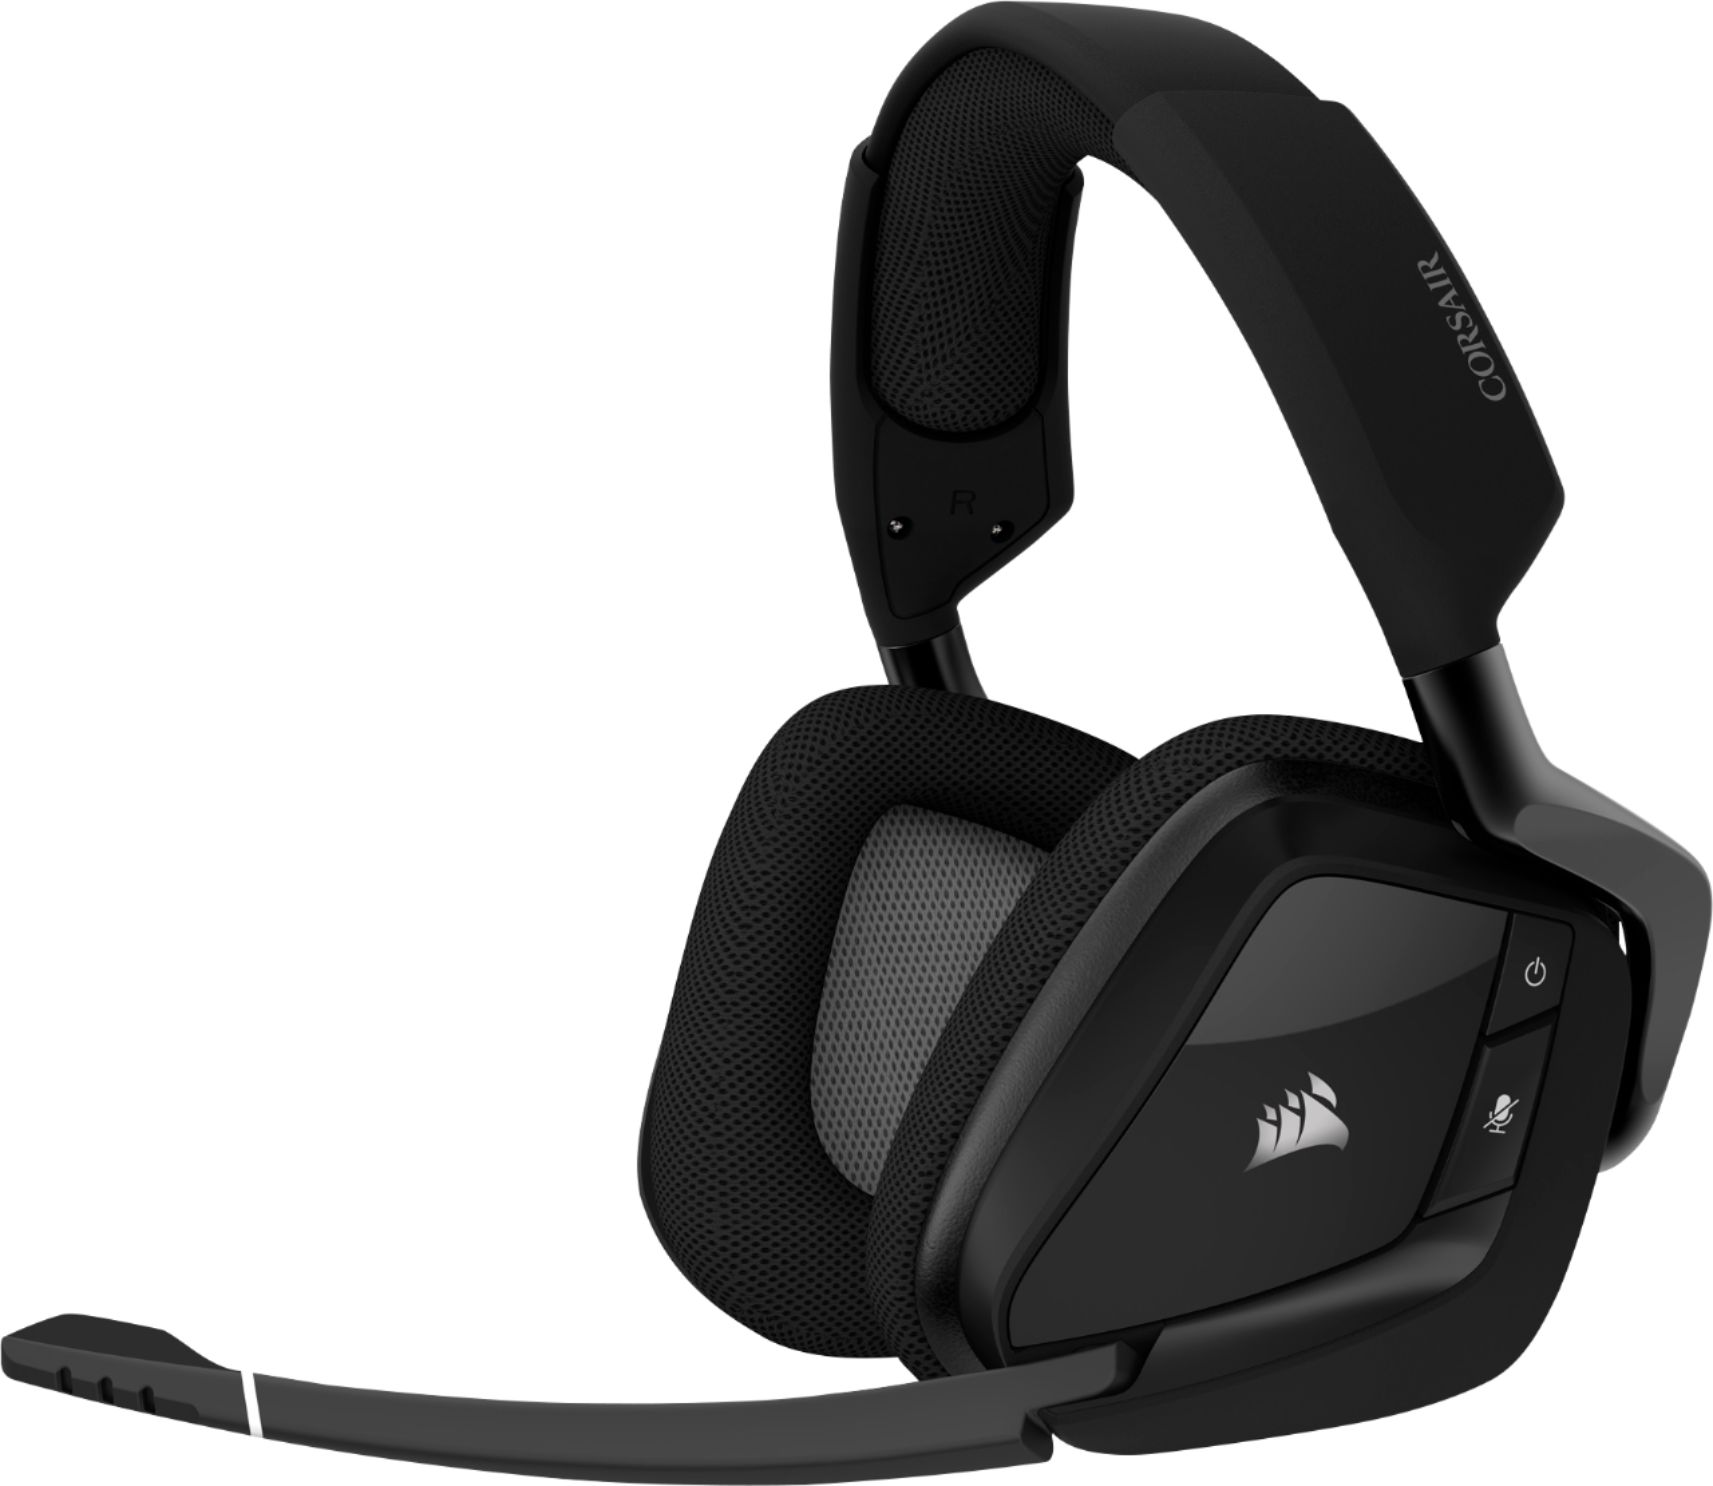 Angle View: CORSAIR - VOID RGB ELITE Wireless Gaming Headset for PC, PS5, PS4 - Carbon